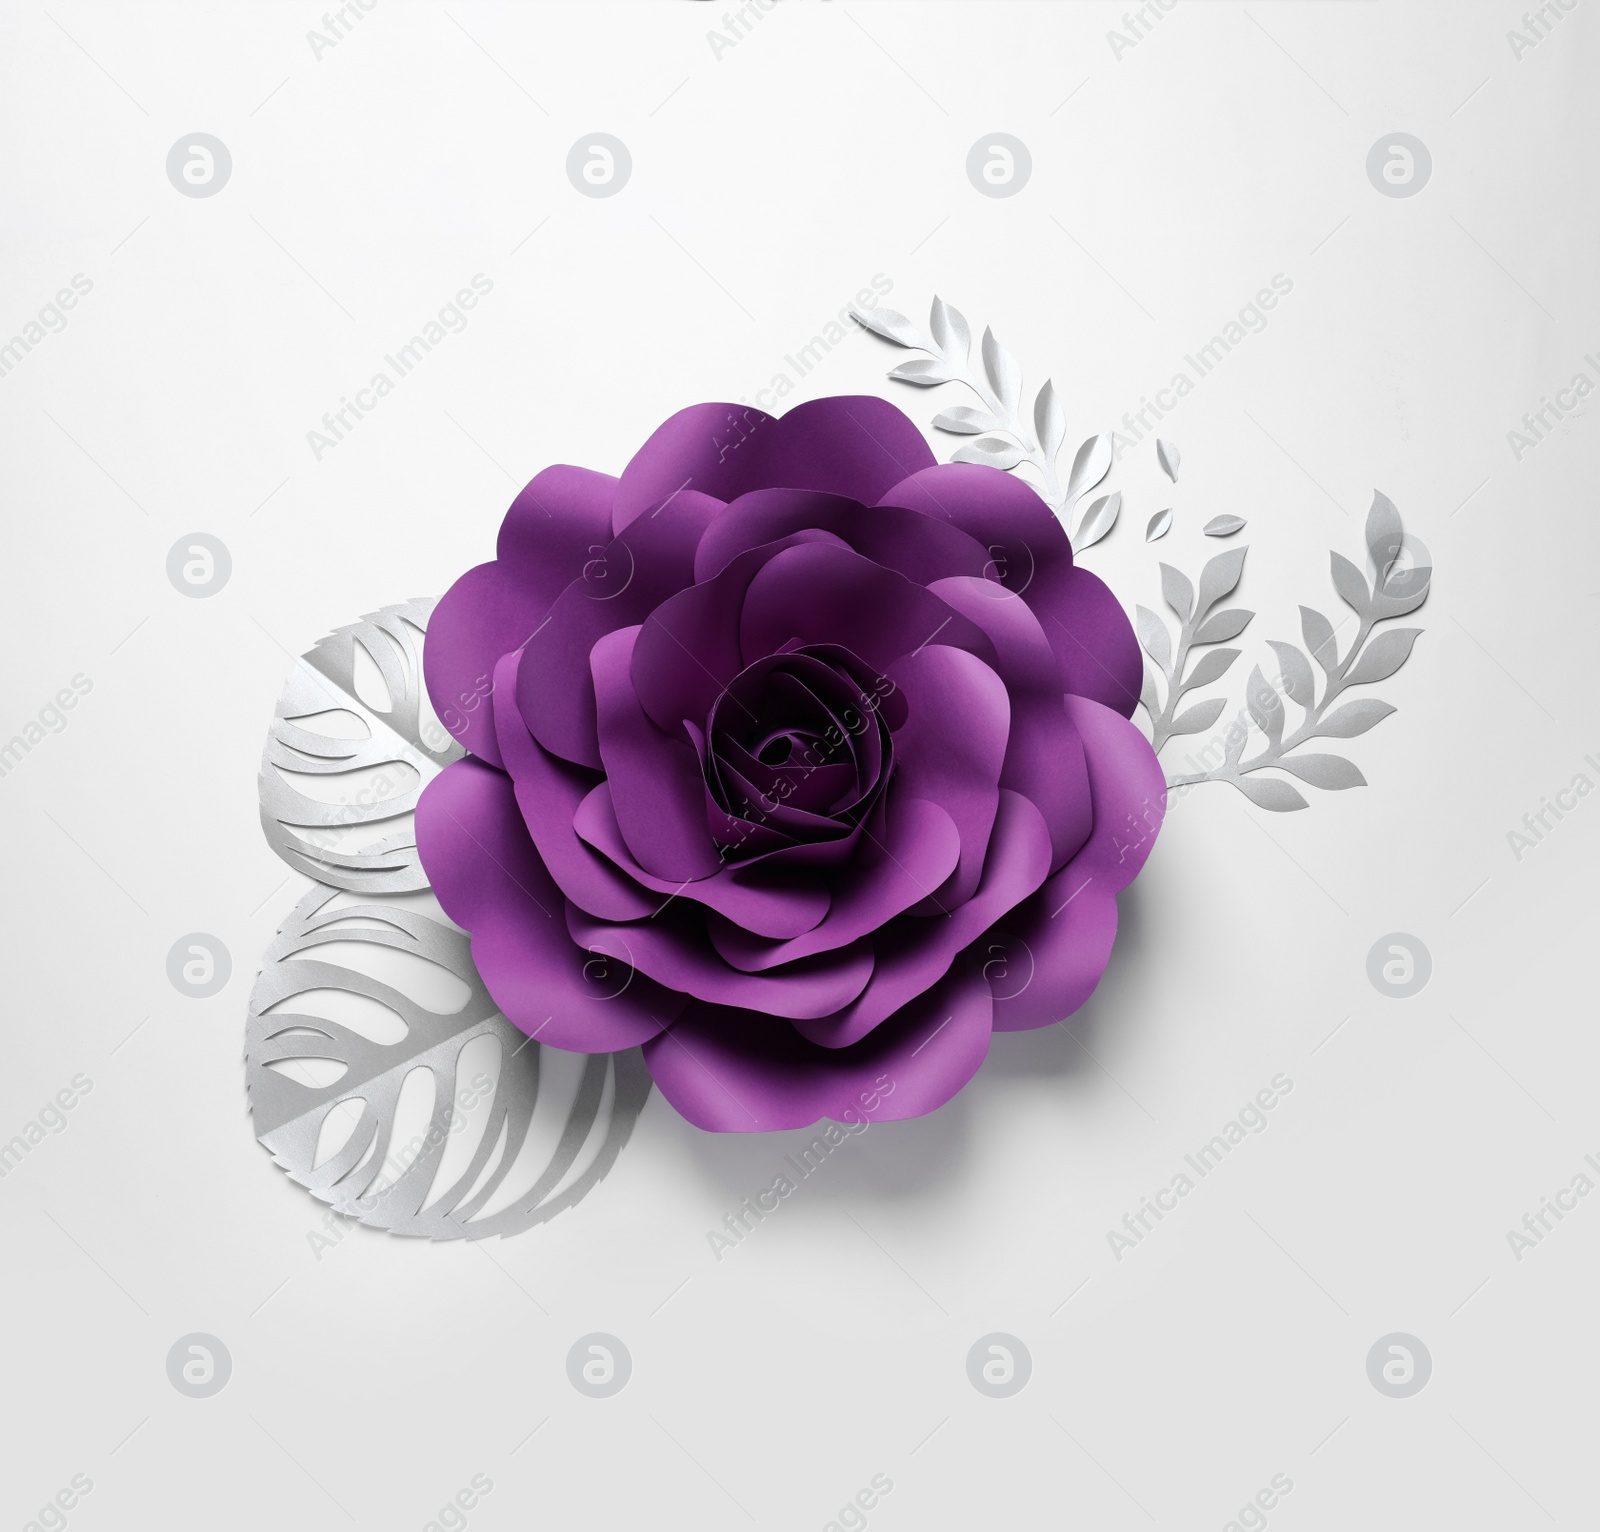 Photo of Beautiful purple flower and branches made of paper on white background, top view